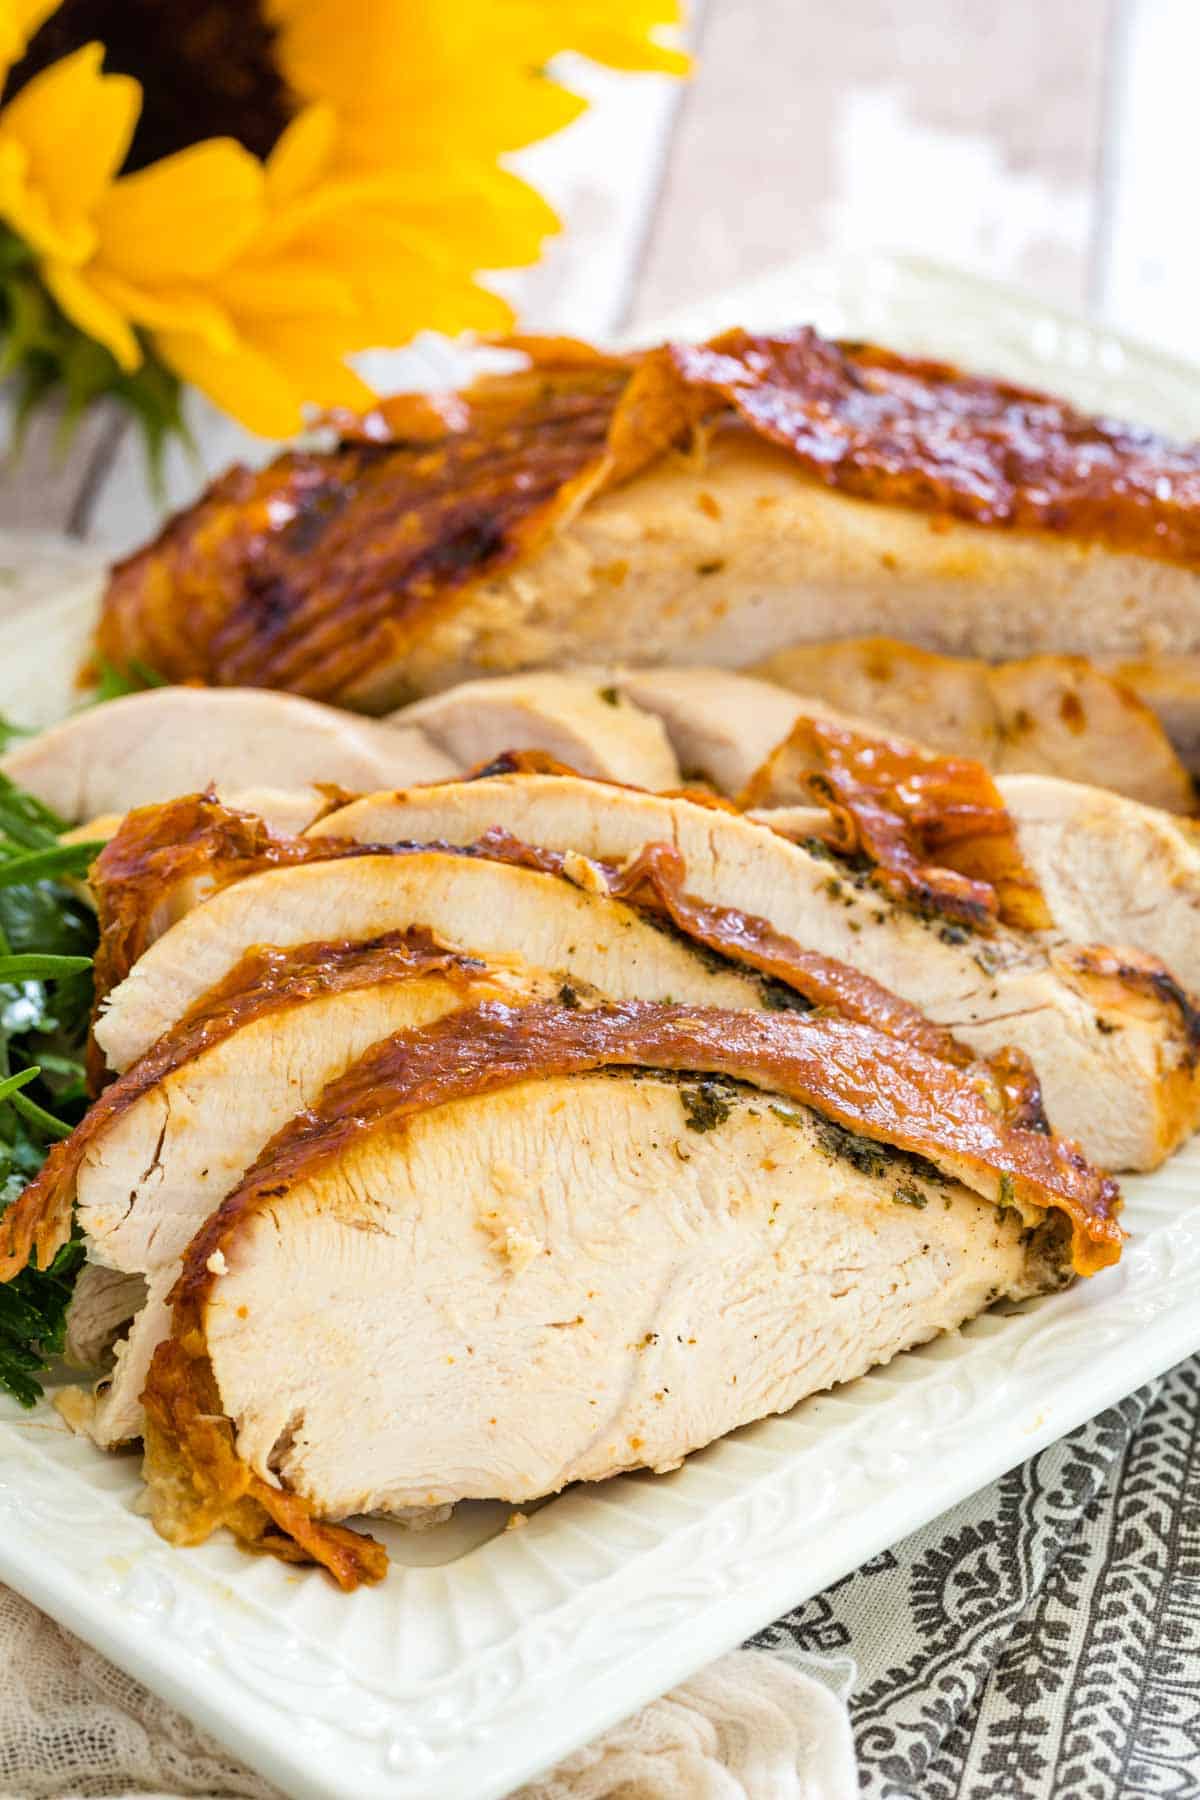 A carved air fryer turkey breast on a platter.